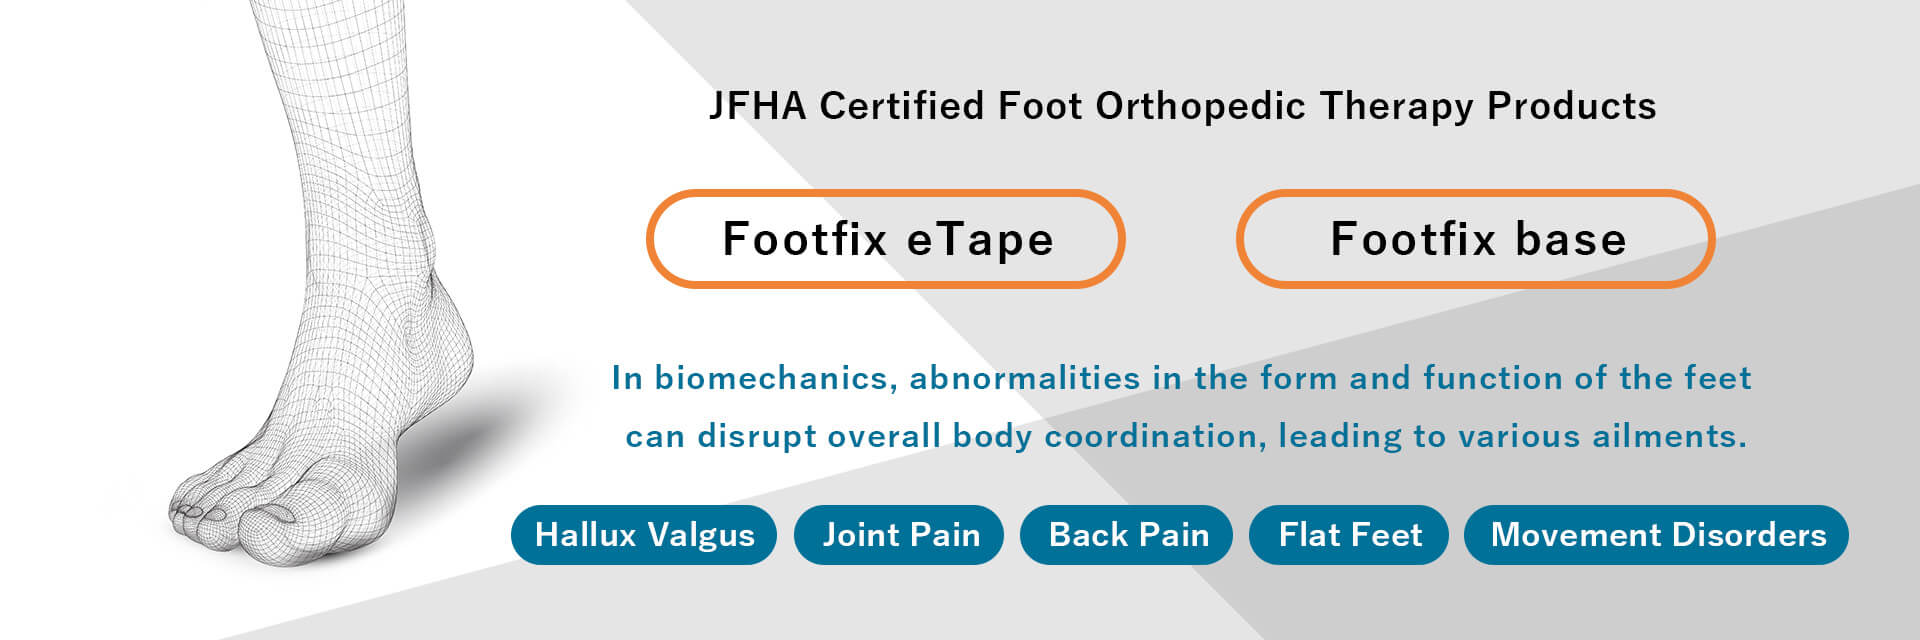 JFHA Certified Foot Orthopedic Therapy Products